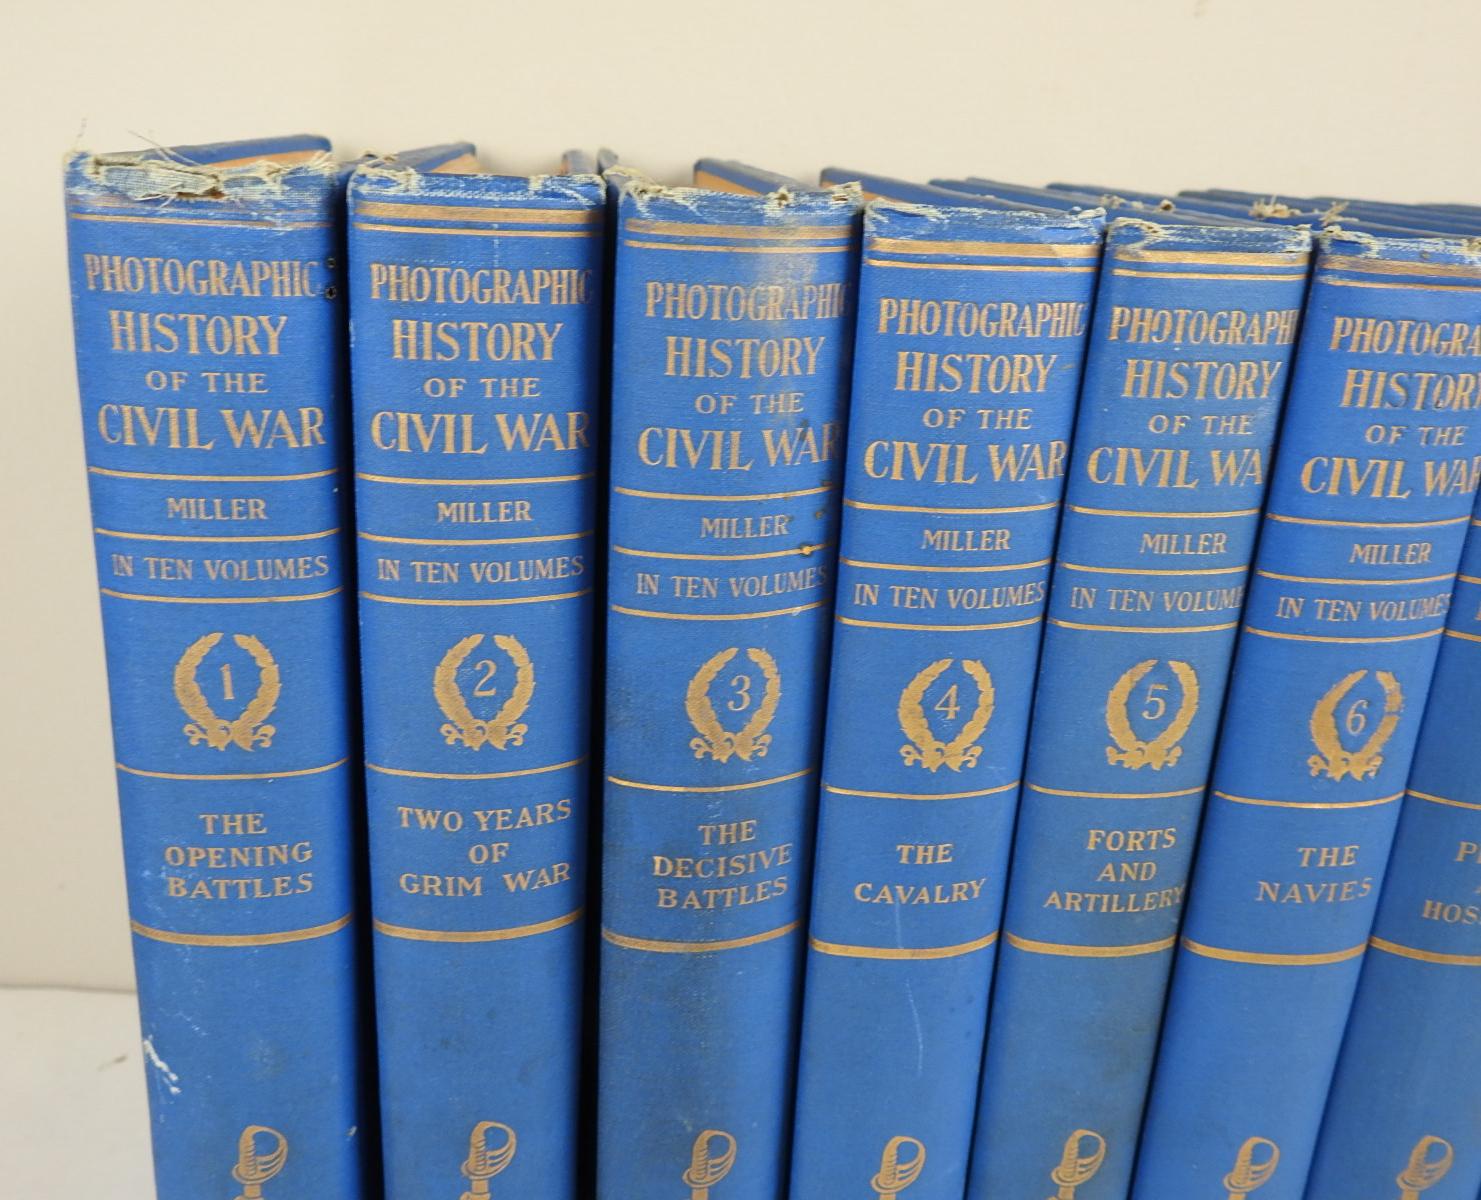 The Photographic History of the Civil War by Francis Trevelyan Miller.  Published by The Review of Reviews, 1911, New York.  Bright blue cloth binding with blind stamp flags, gilt title on spine and gilt top page edges.  Profusely illustrated with